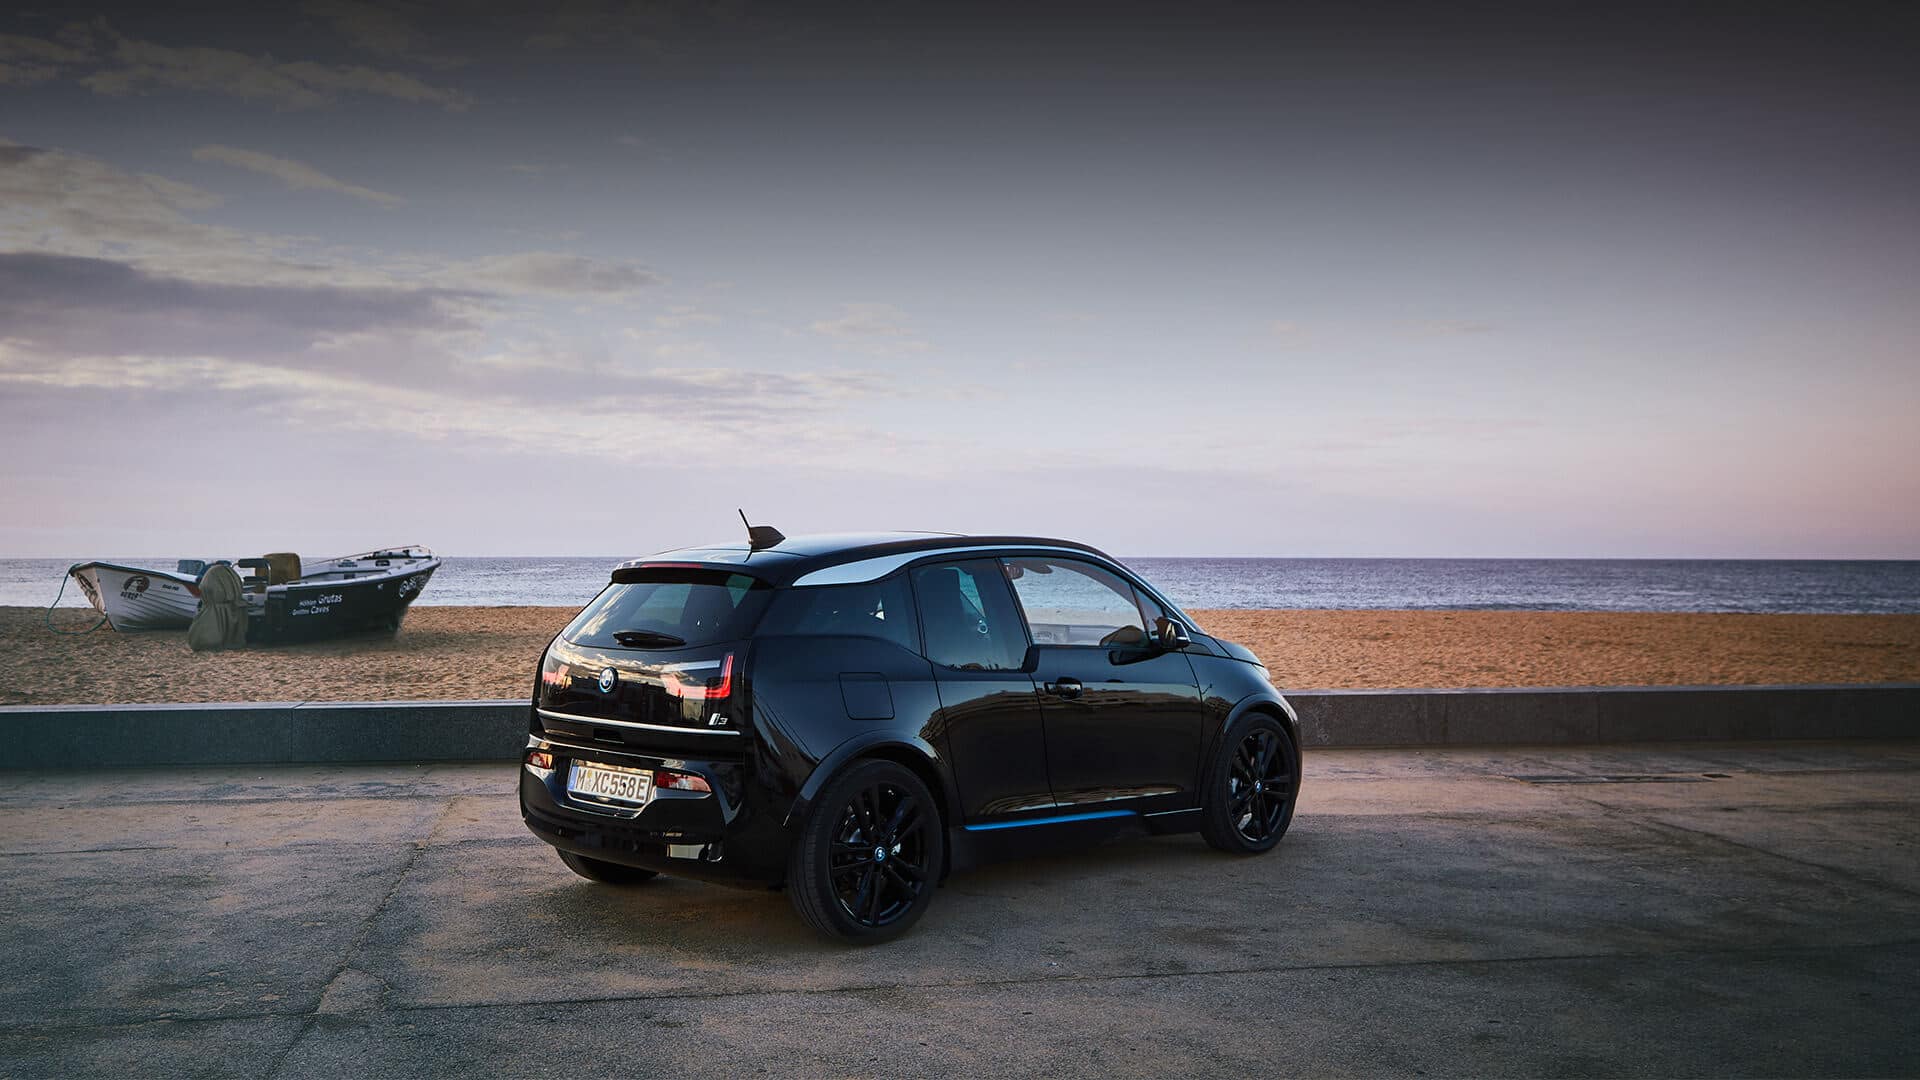 Goodbye, BMW i3: This love never gets rusty | BMW.com